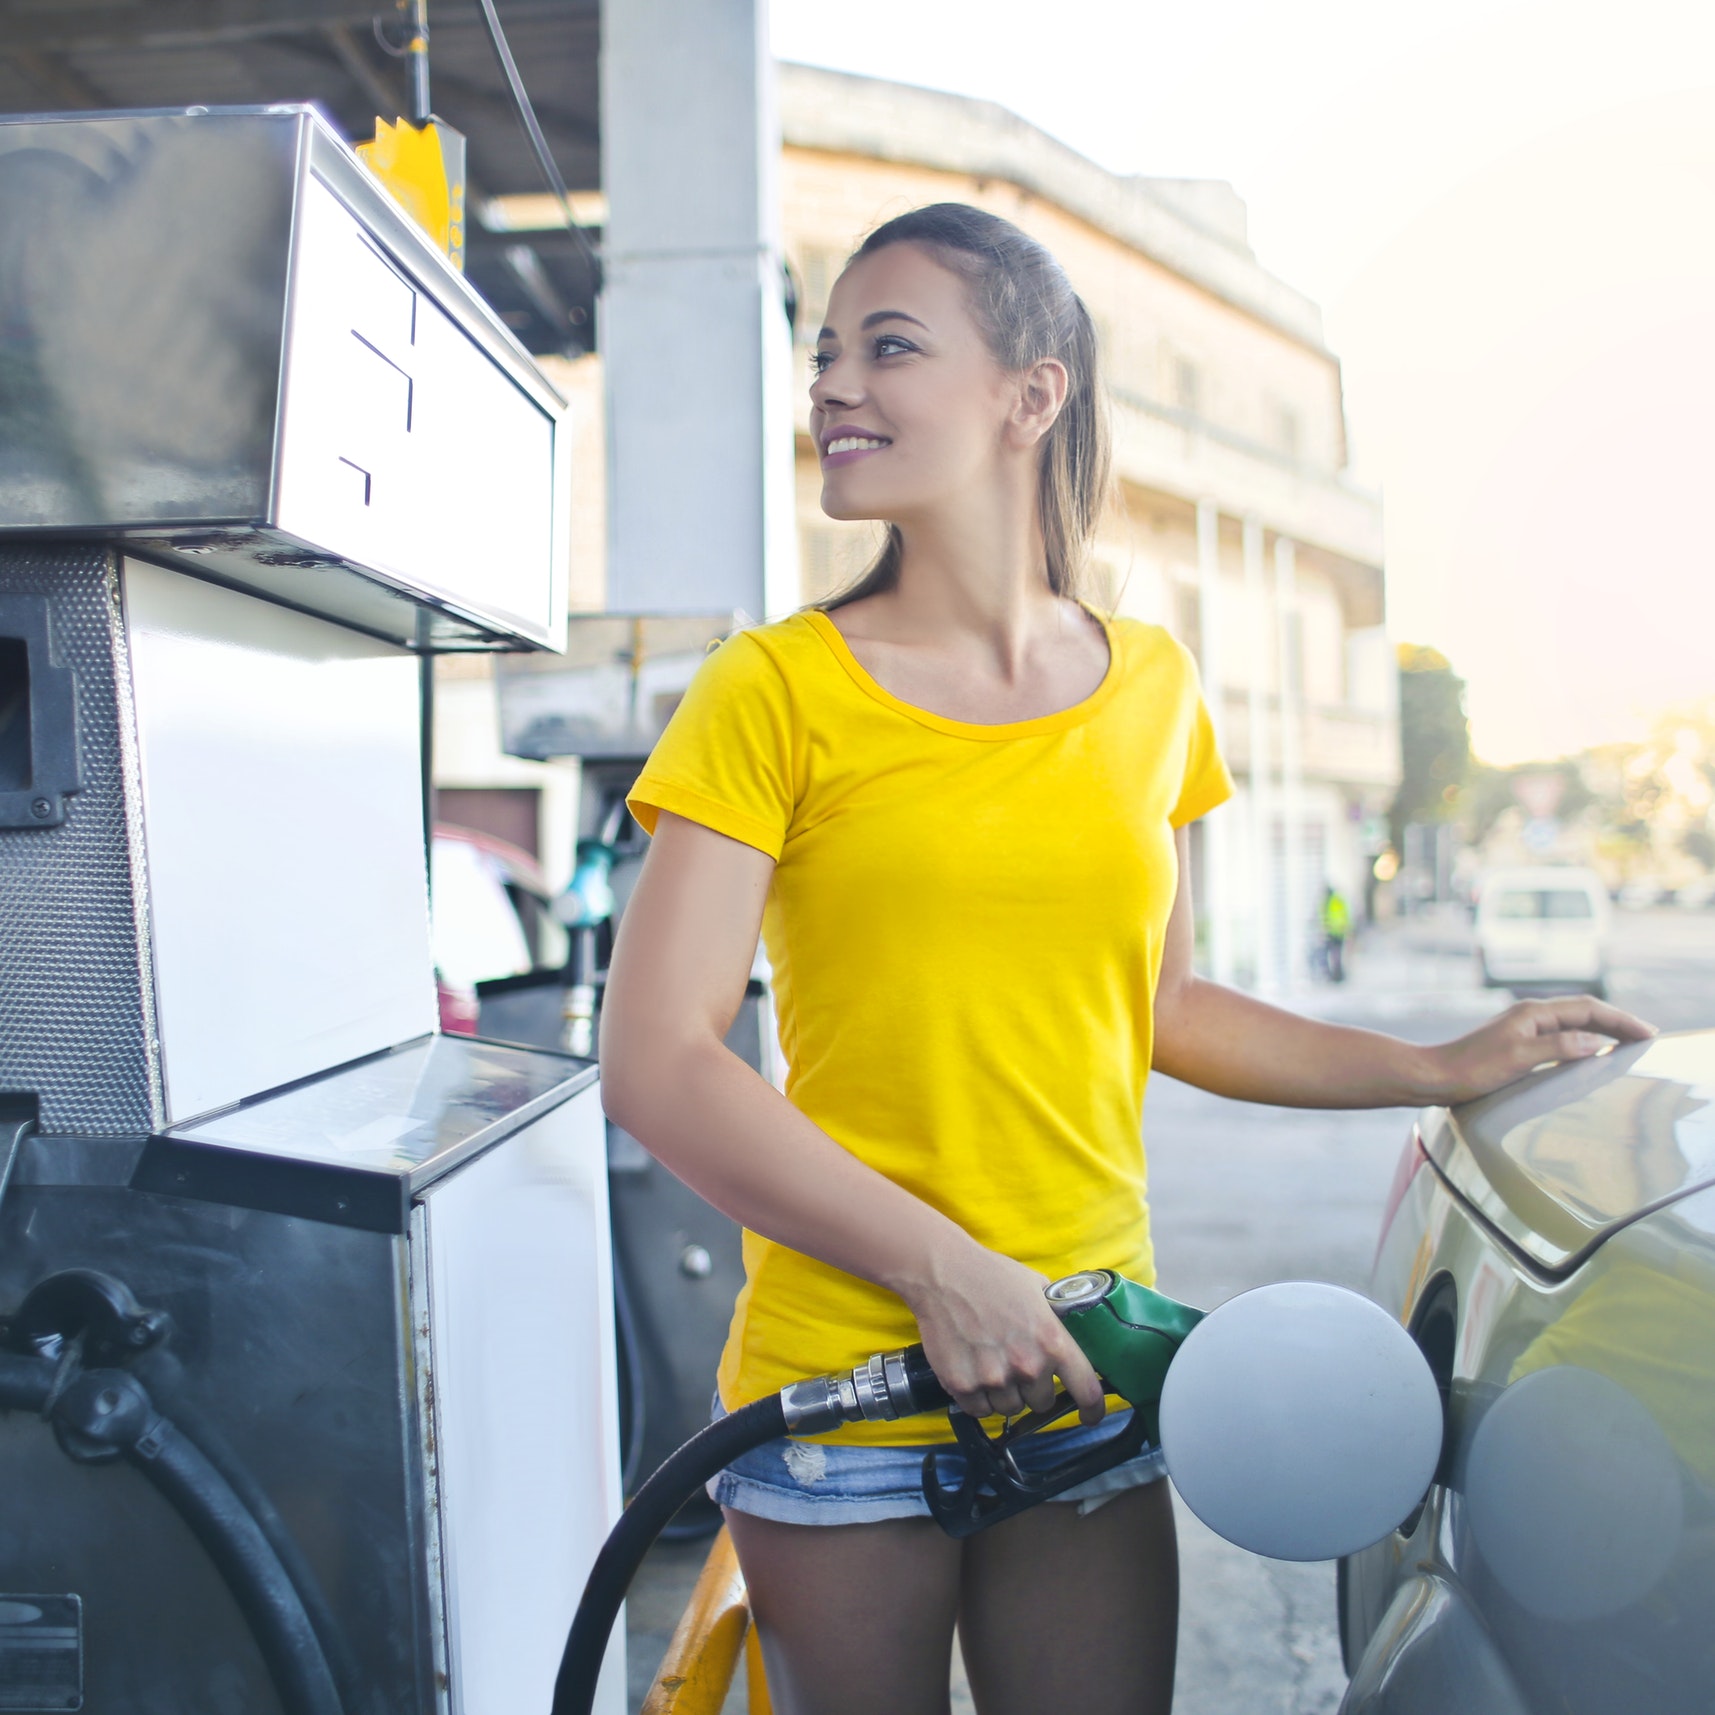 A woman fuels her car at a gas station